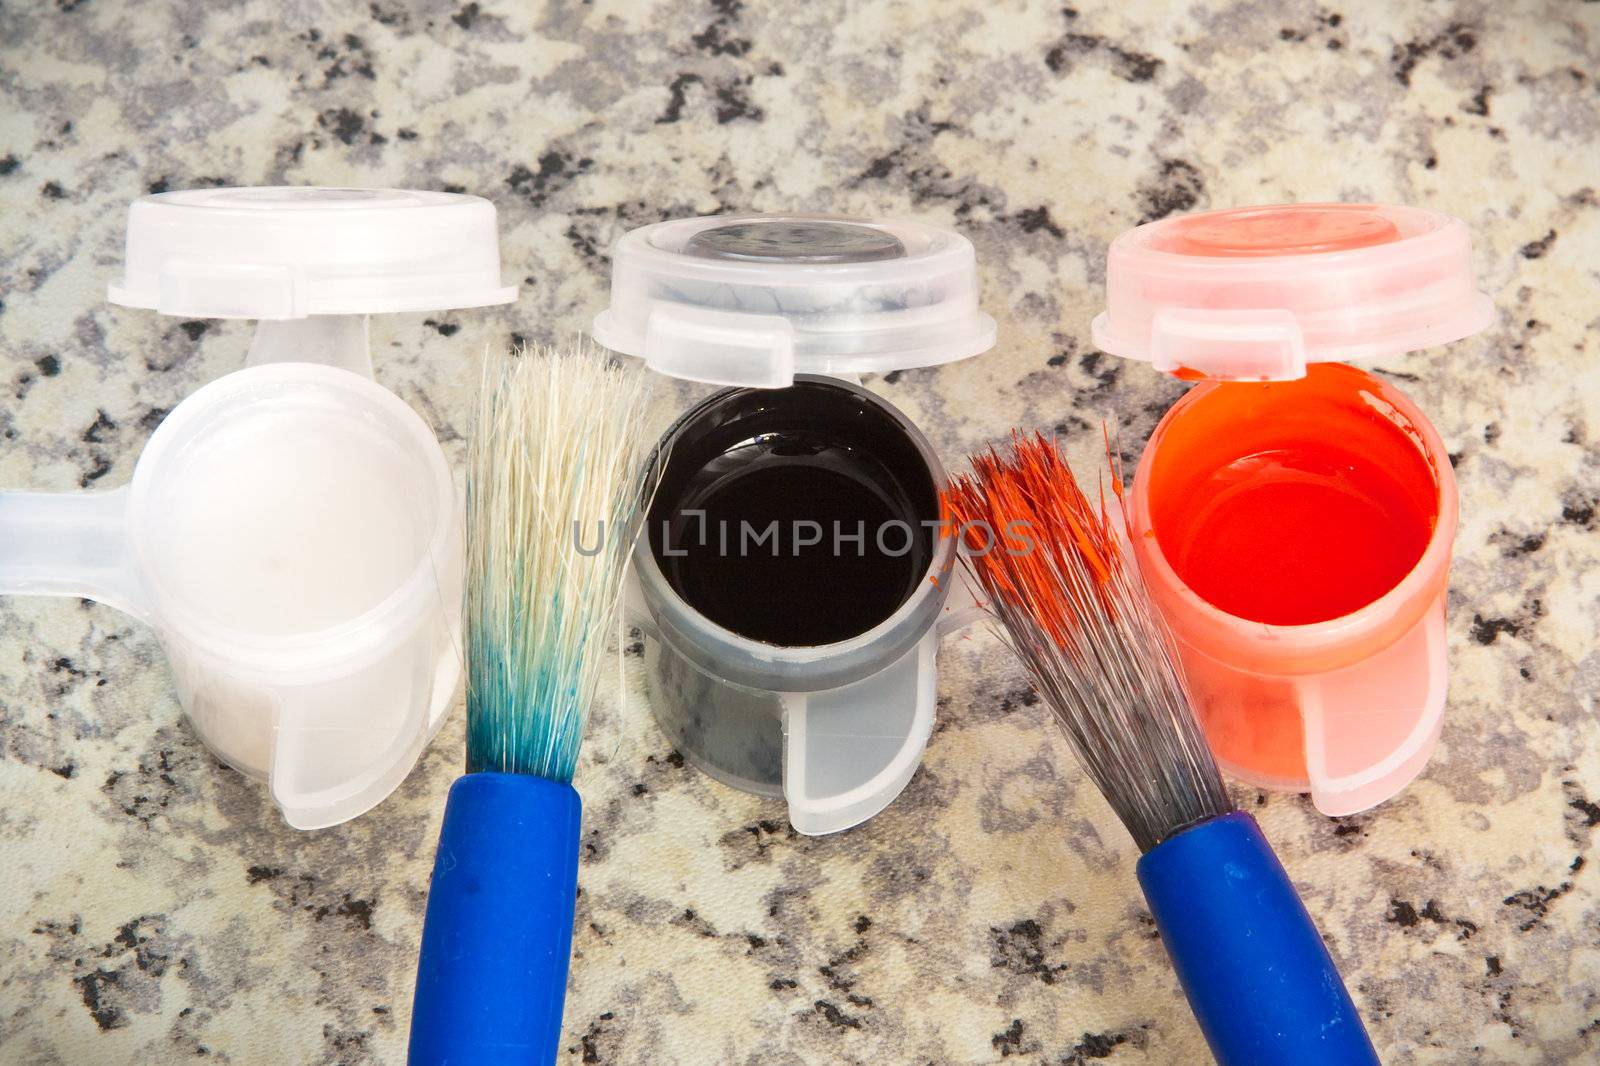 Paint brushes and paint pots on a marble surface